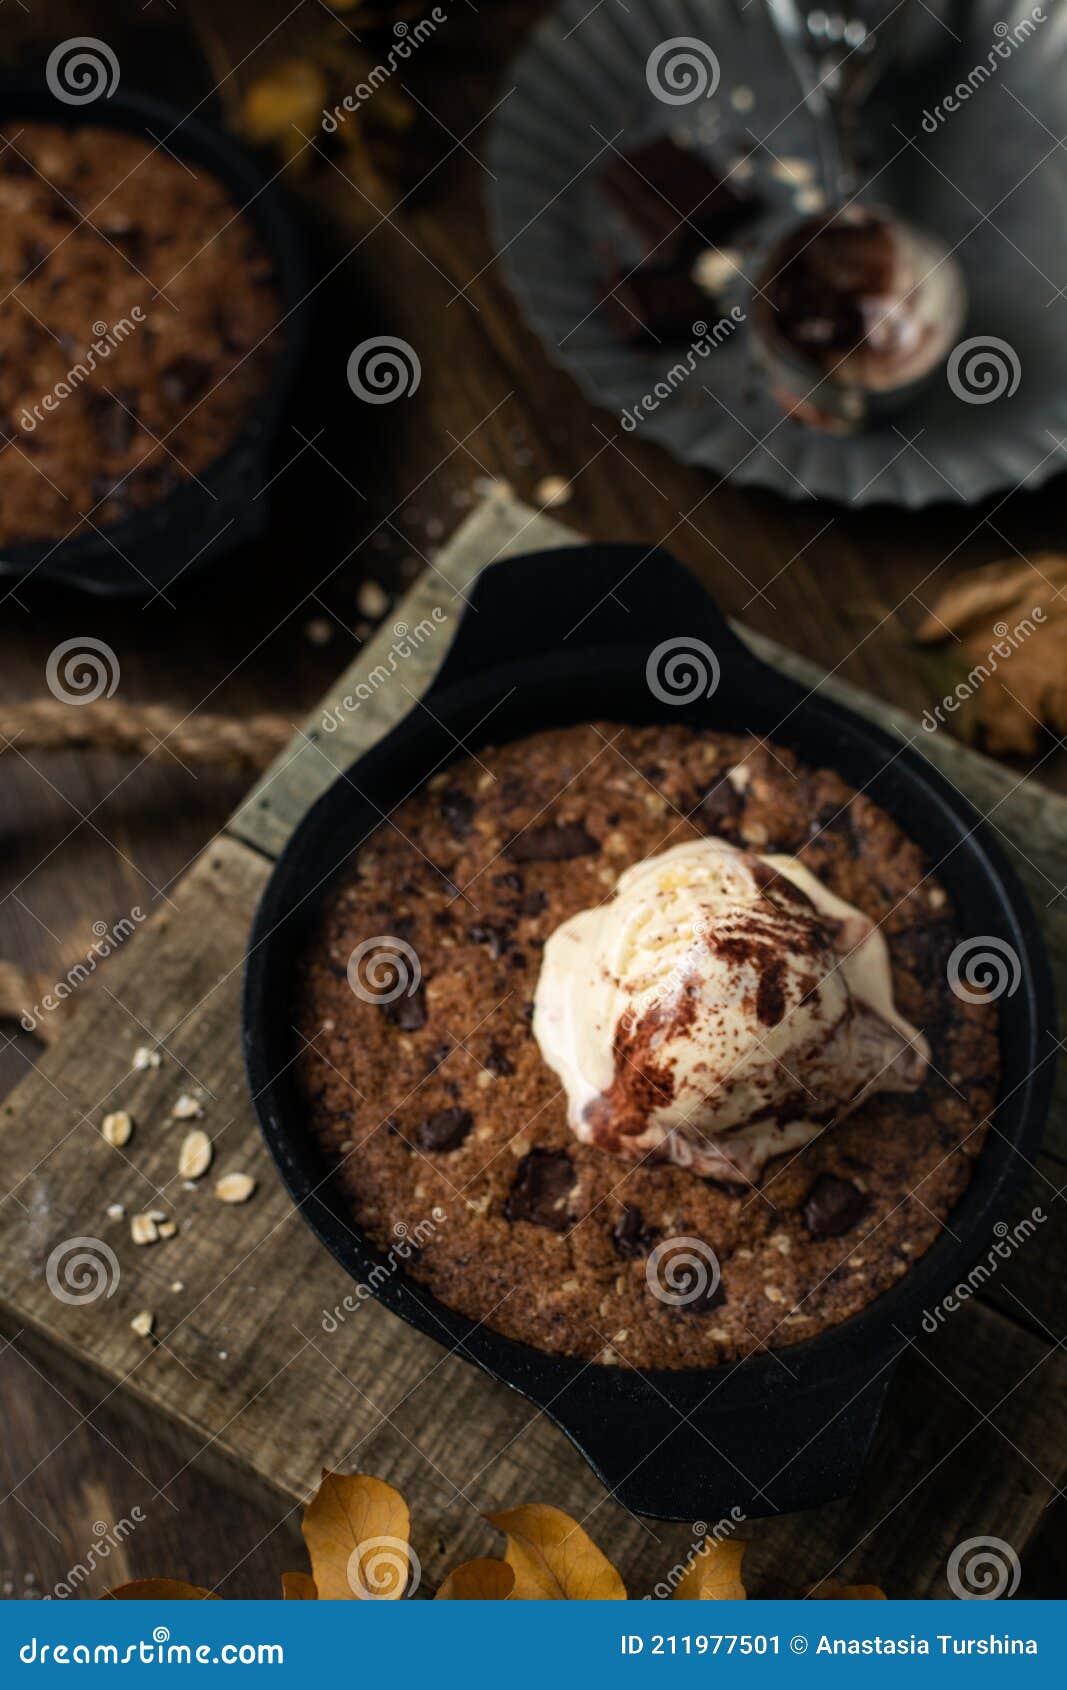 Giant Skillet Cookie Chocolate Chips Ice Stock Photo 6822677366